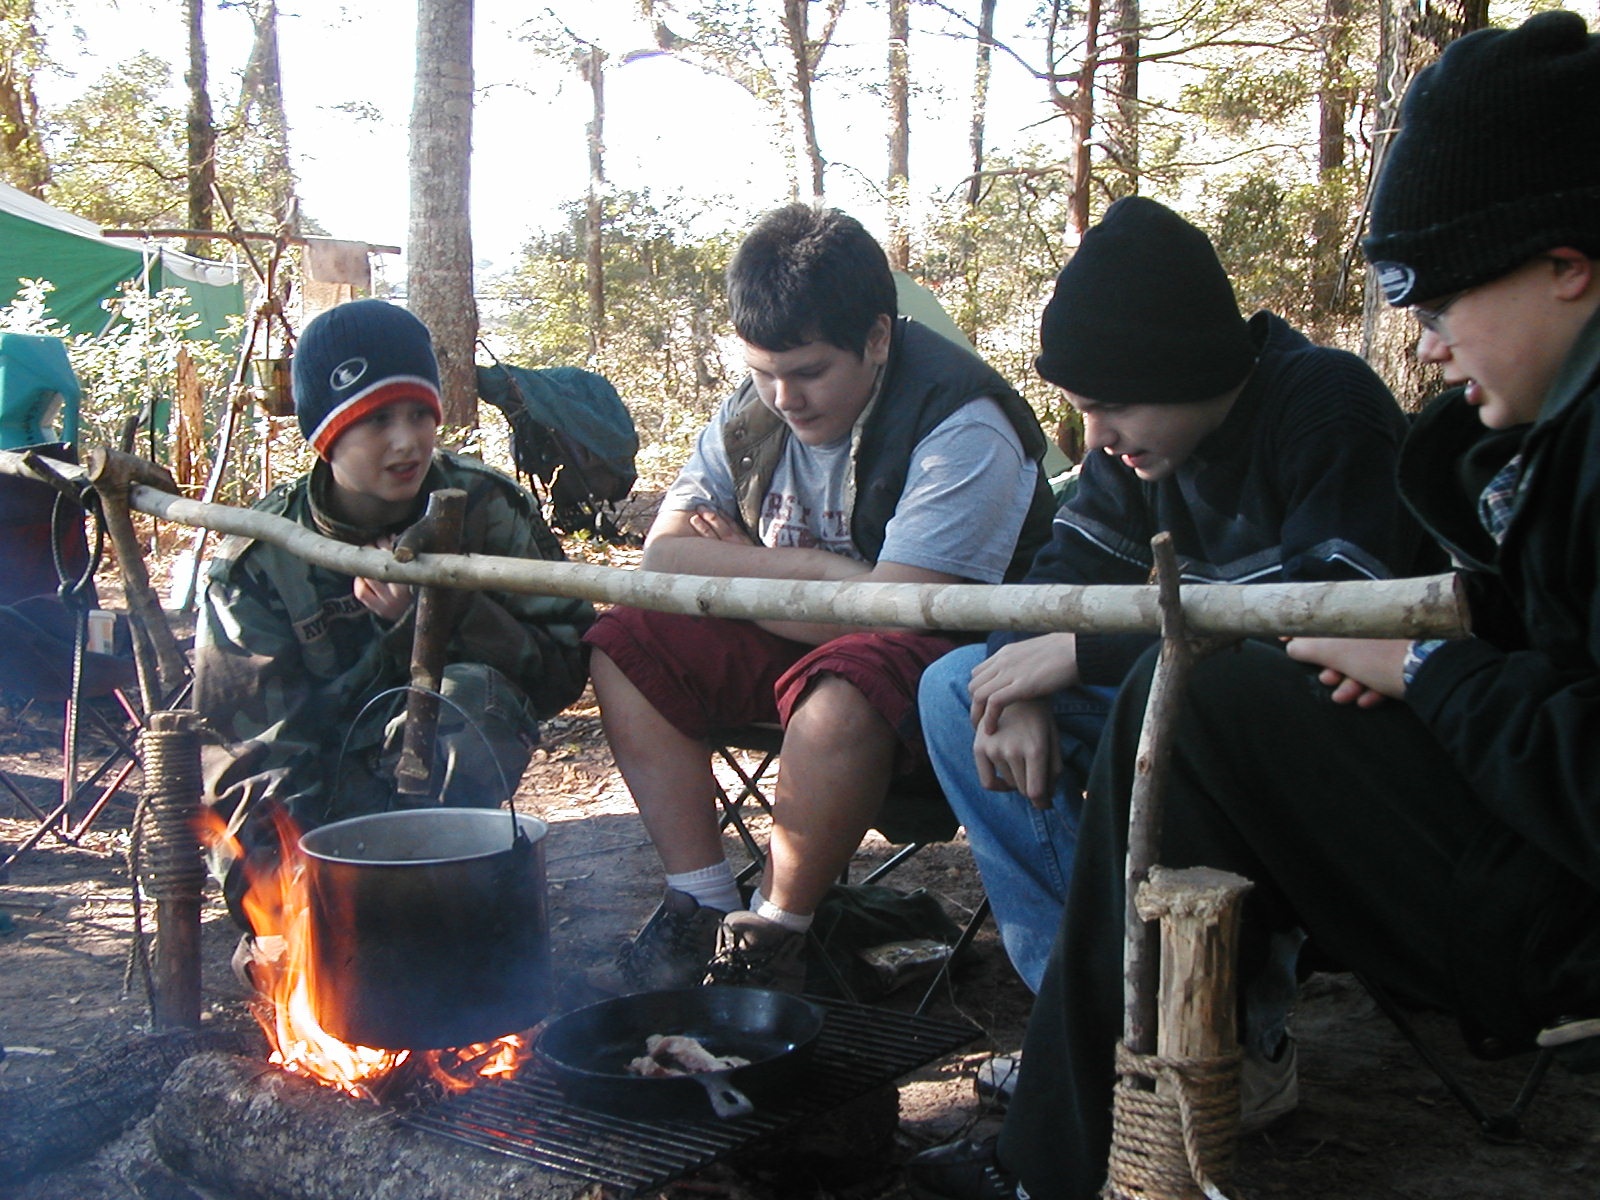 Cool Camping Gear Archives  Fire pots, Campfire, Campfire cooking